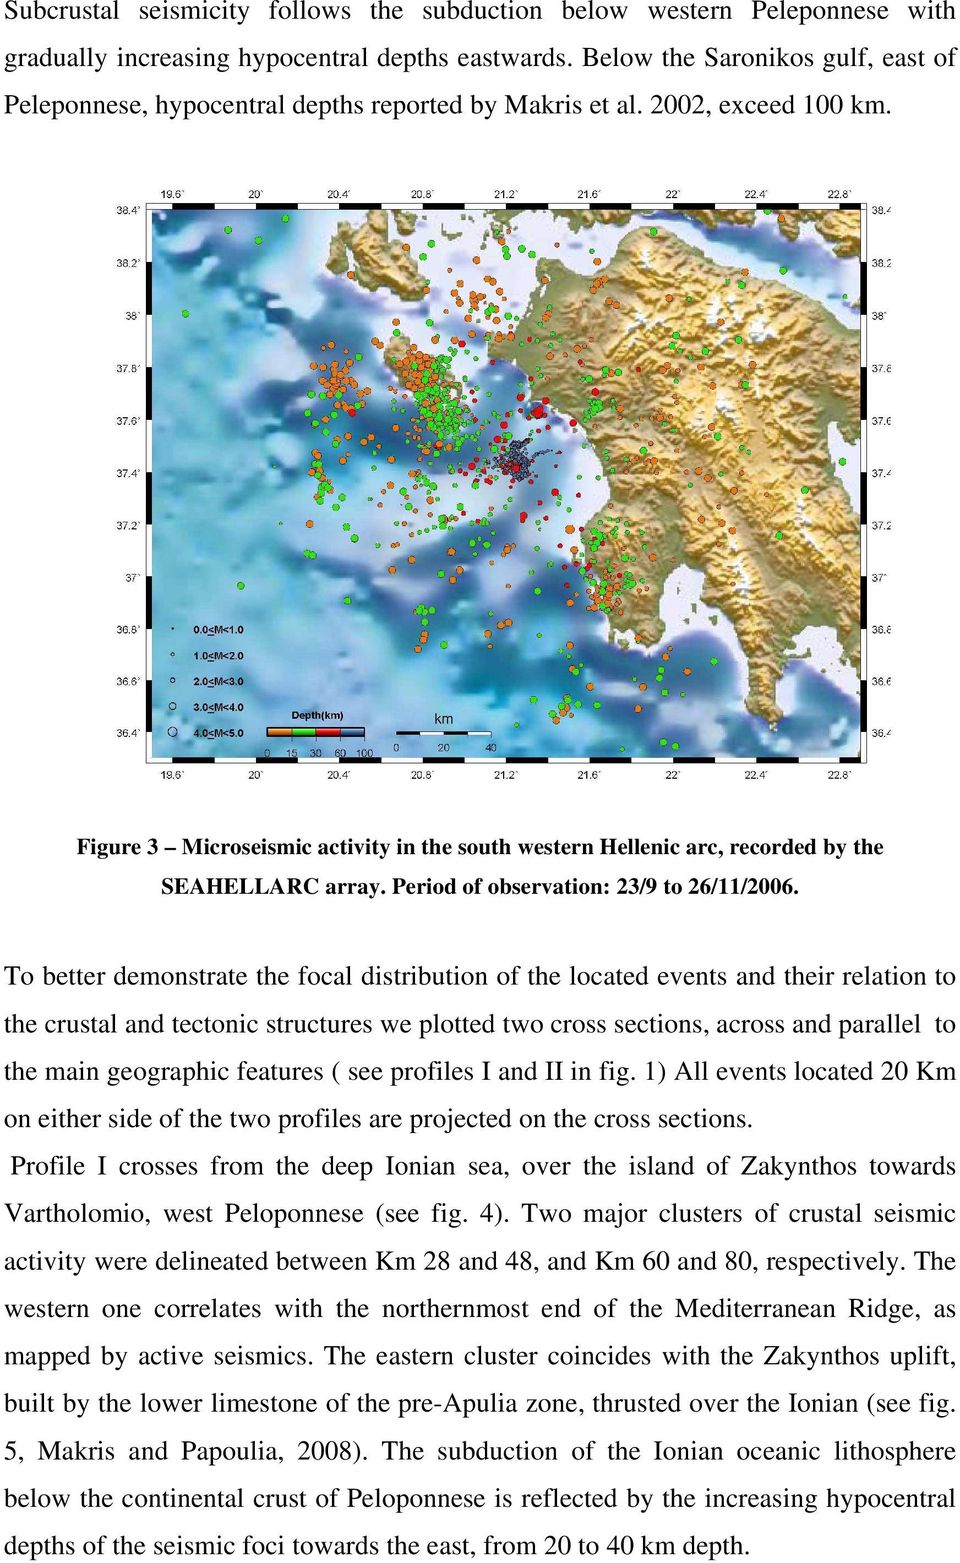 Figure 3 Microseismic activity in the south western Hellenic arc, recorded by the SEAHELLARC array. Period of observation: 23/9 to 26/11/2006.